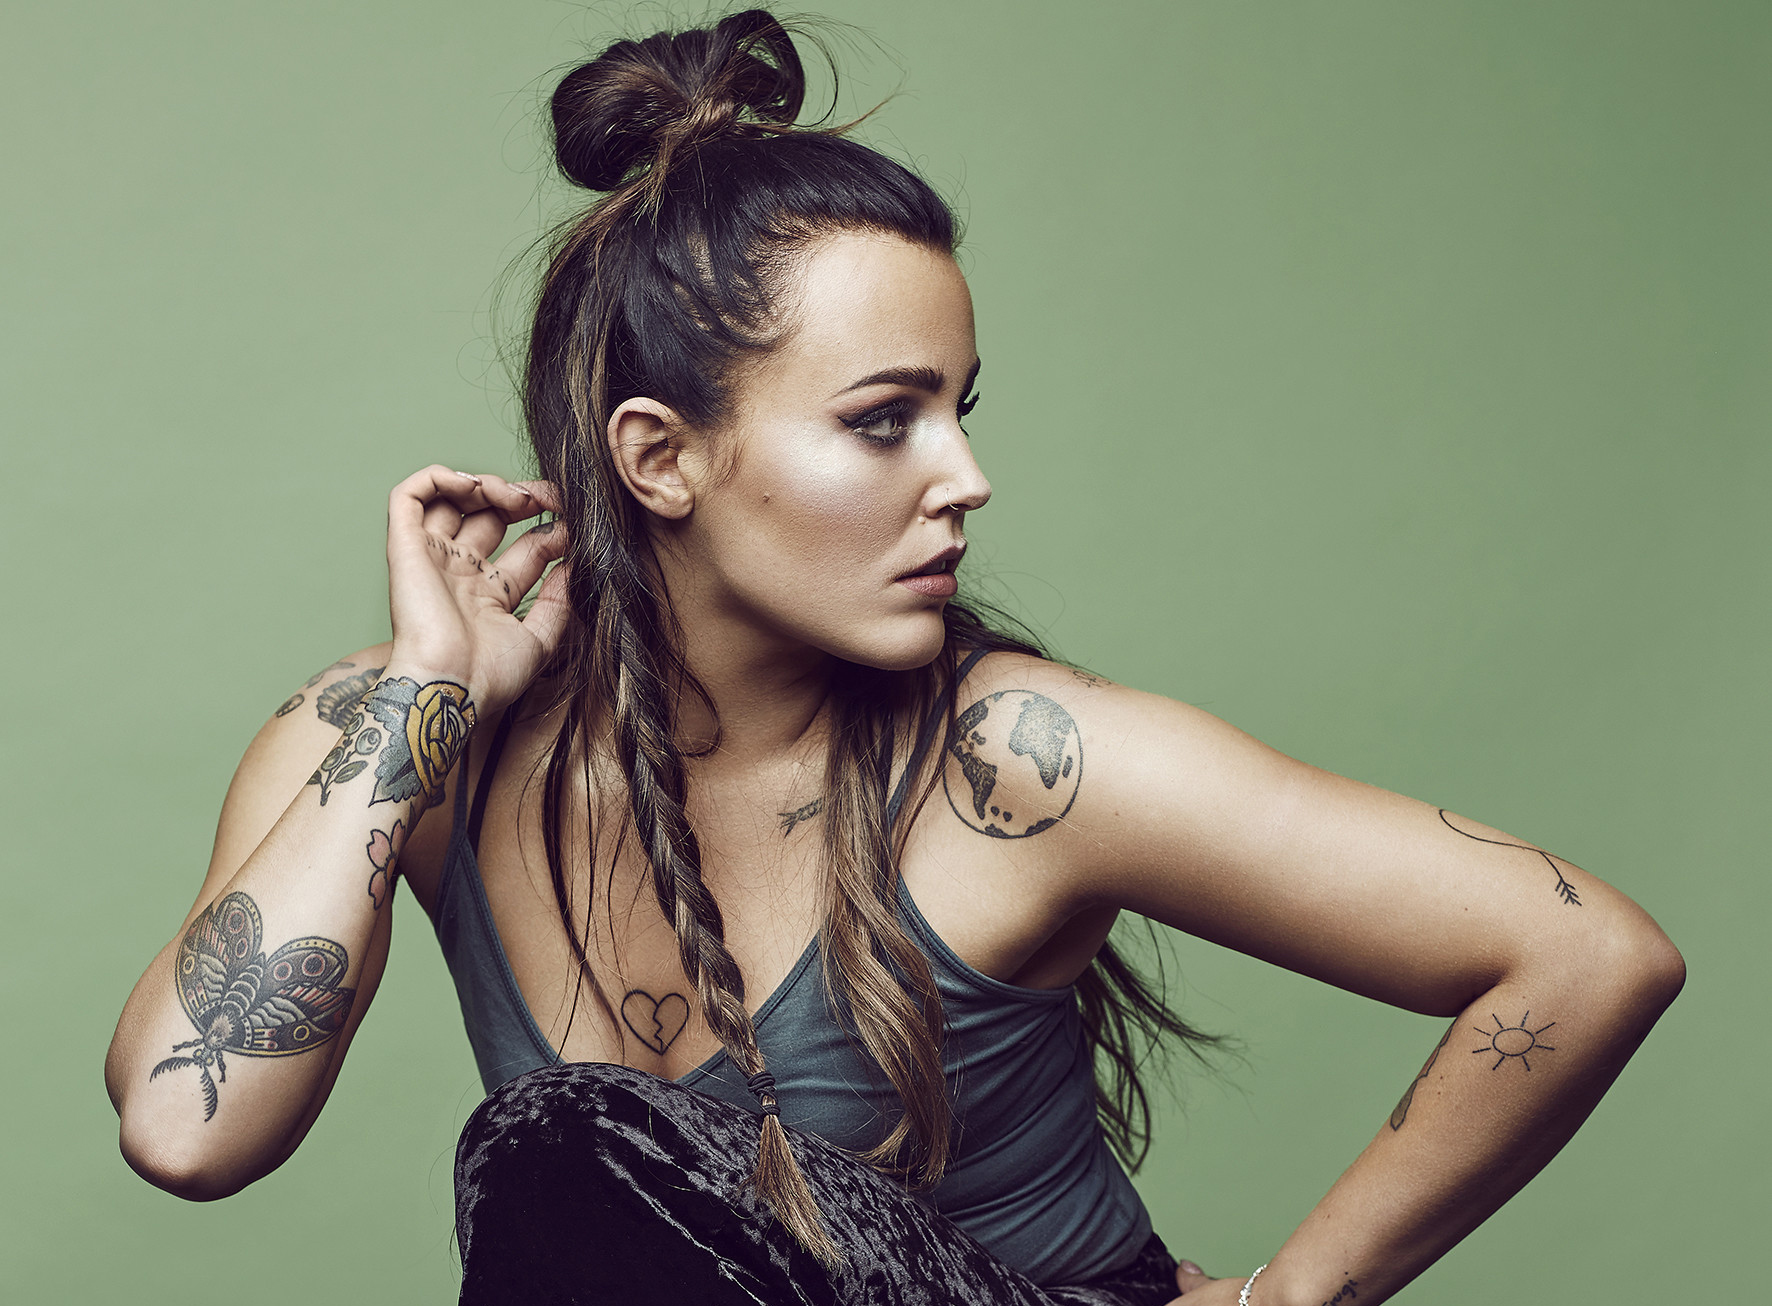 Tune in to ‘Rocket’ – the latest single from Miriam Bryant!